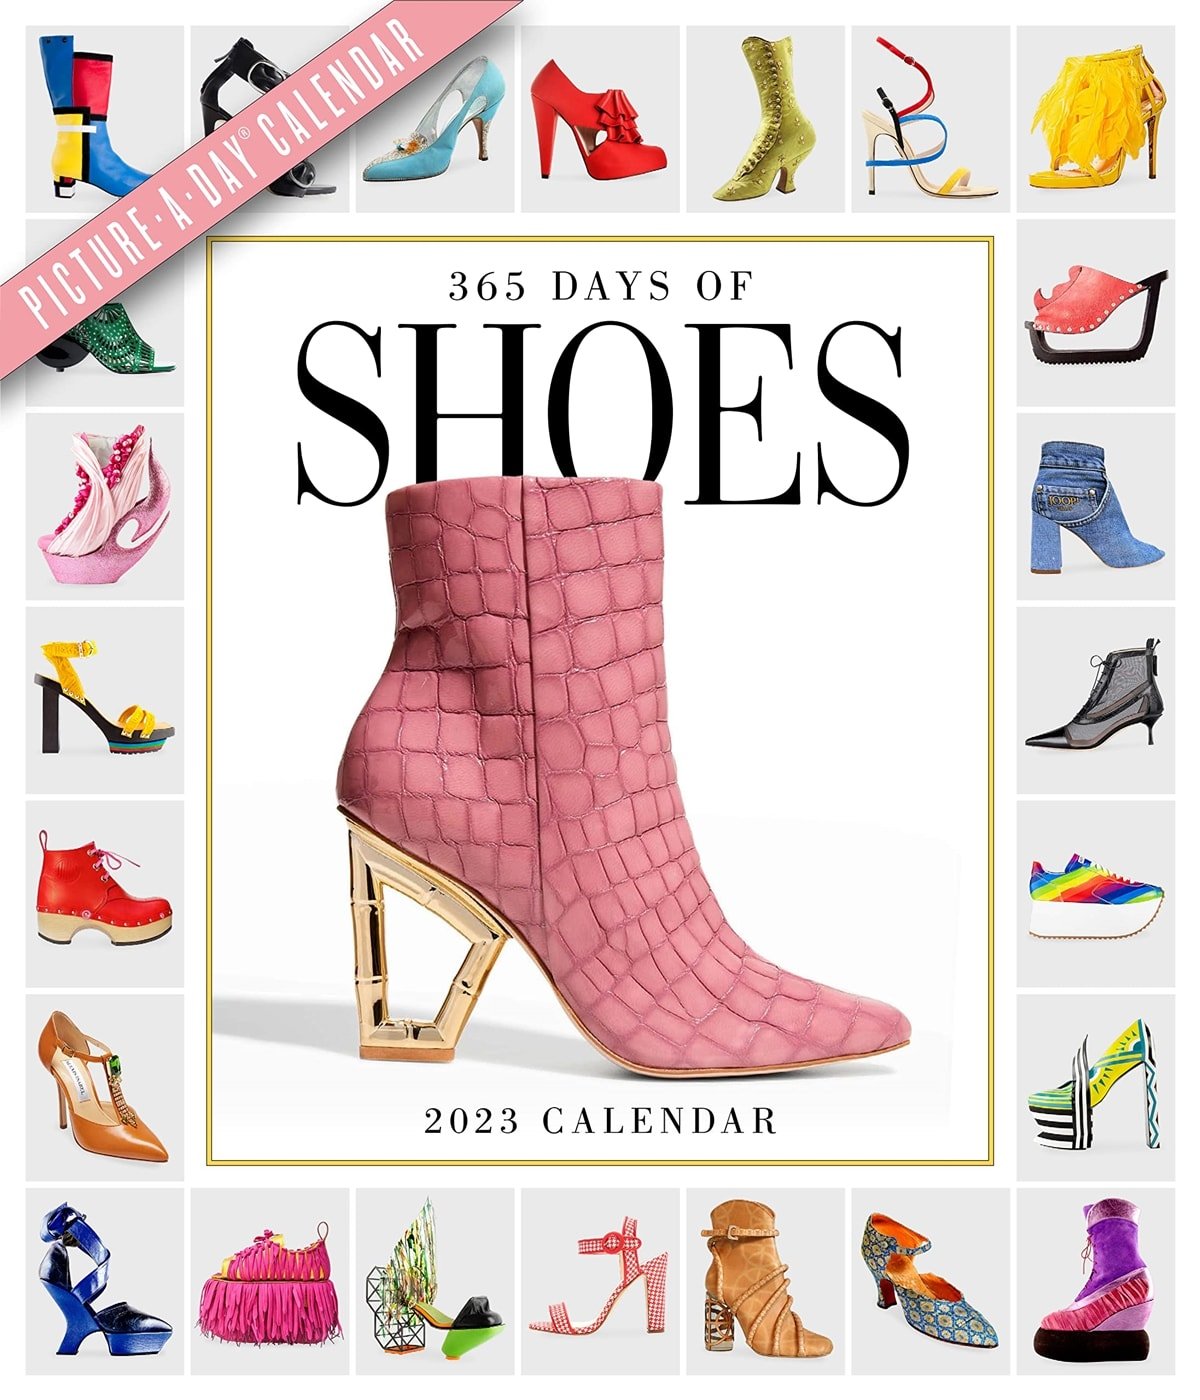 365 Days of Shoes features footwear ranging from the sexy to the prim, the flashy to the polished—kitten heels from Manolo Blahnik